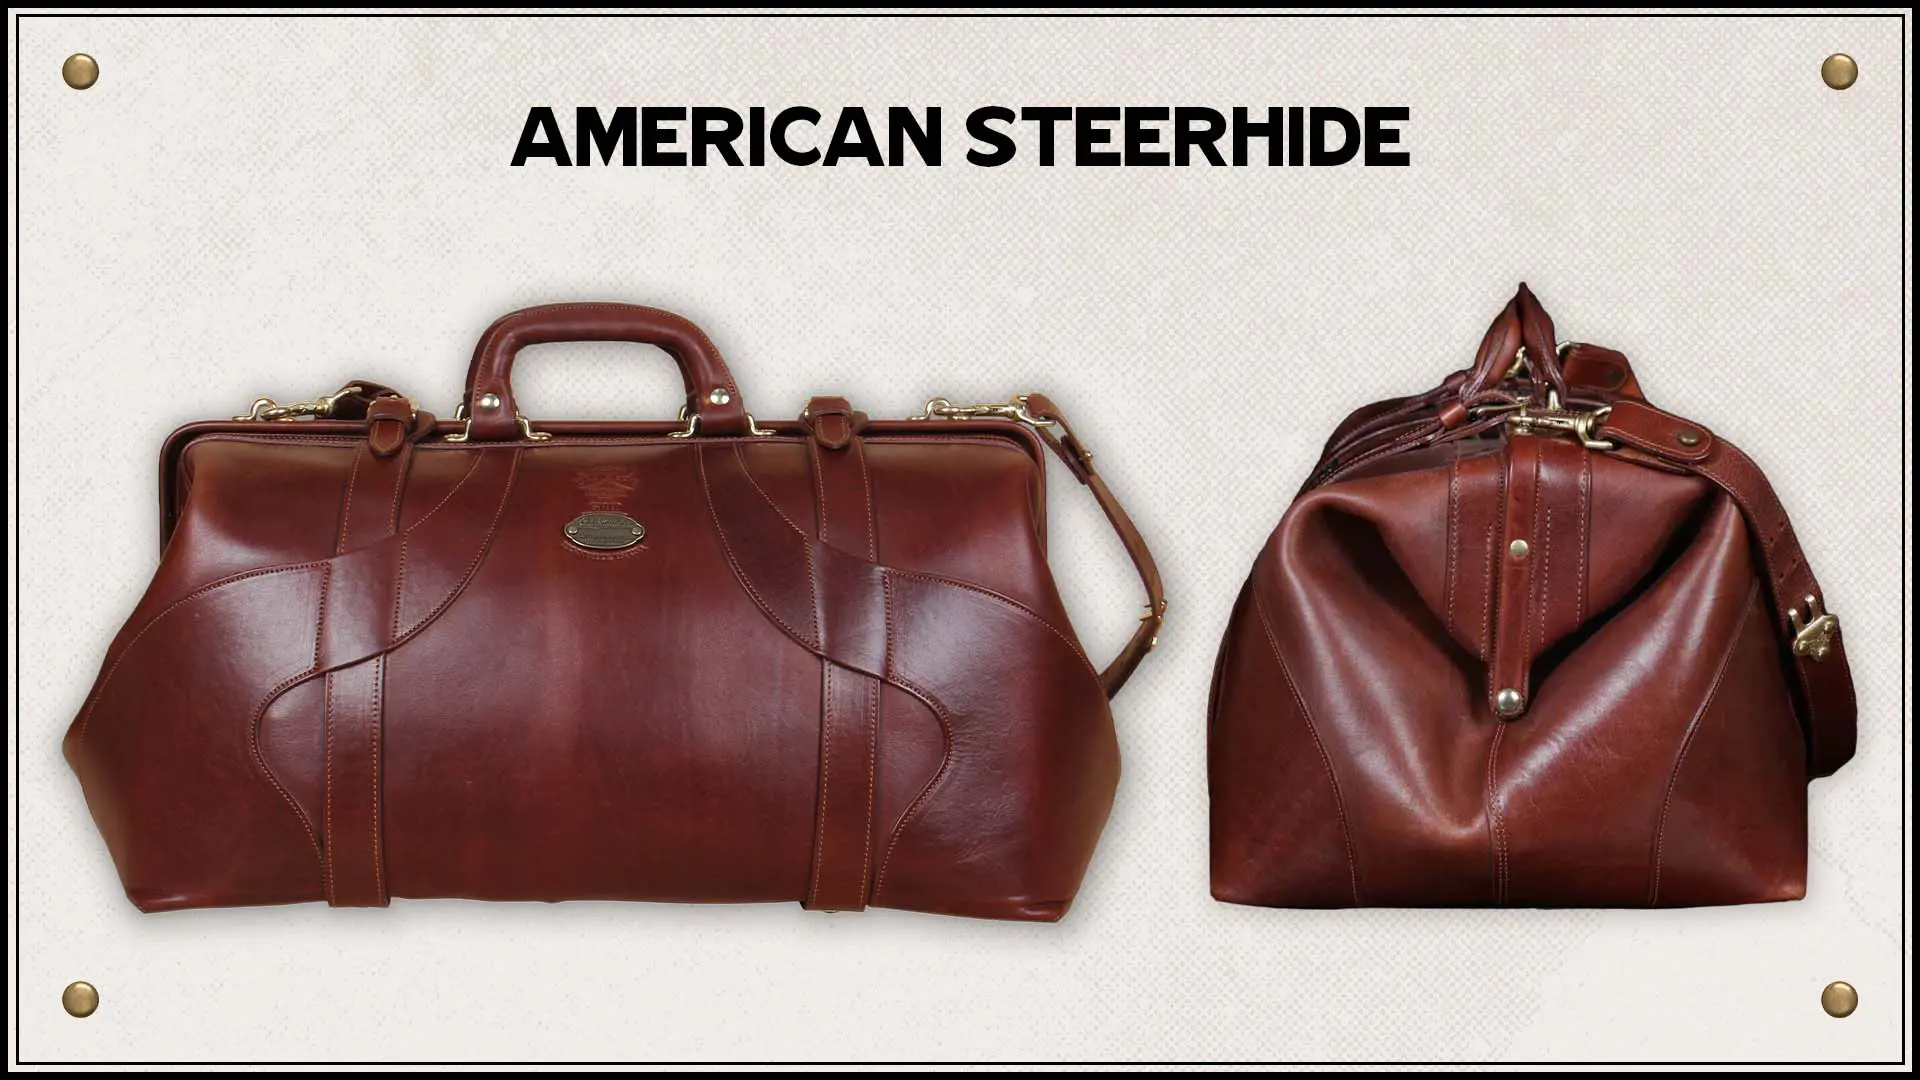 American steerhide bags showing the front and side details